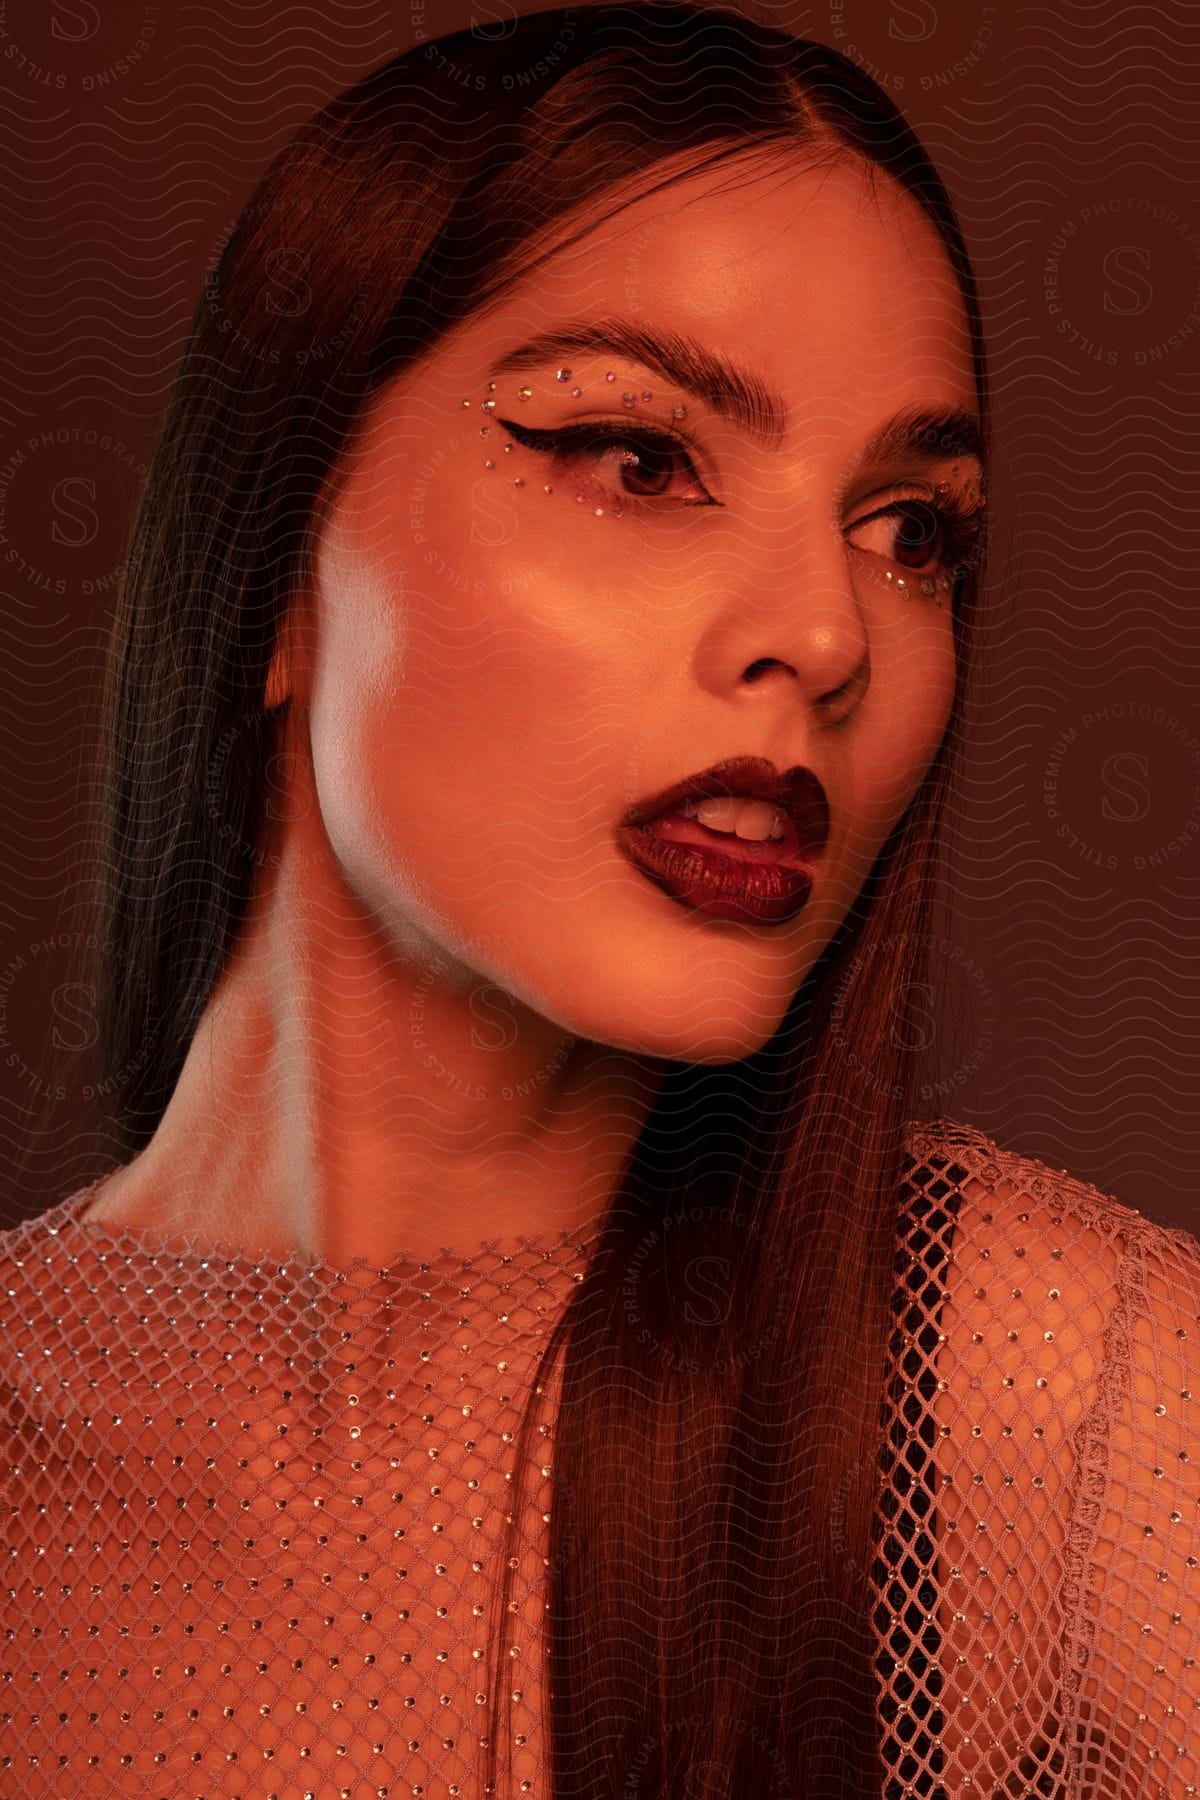 A woman in heavy makeup and sheer net top with mouth open.